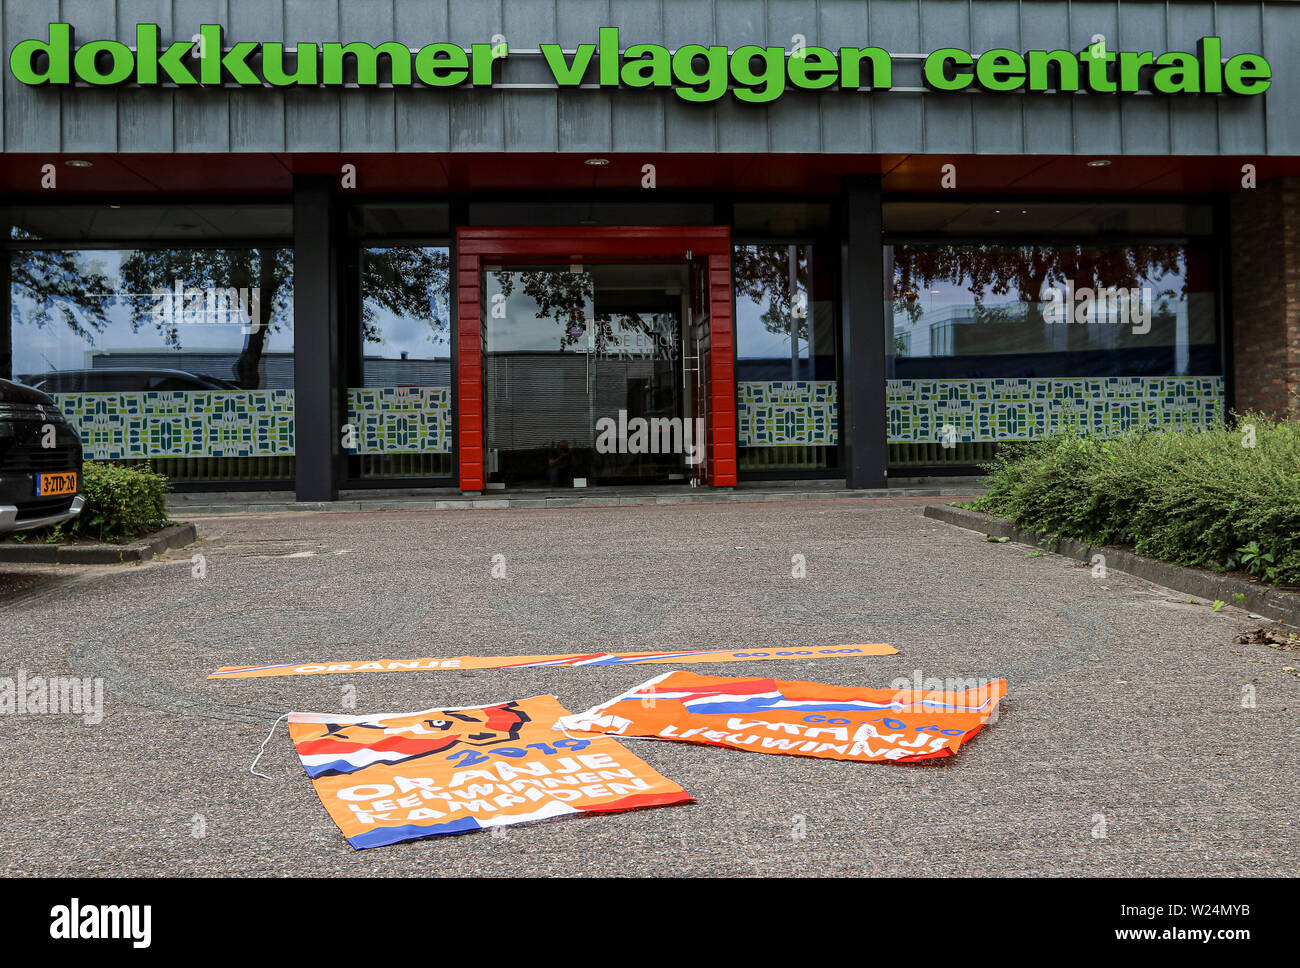 DOKKUM, 05-07-2019, Dutchnews, The Netherlands believes in it, the Dokkumer Vlaggen Centrale (DVC) believes in it. After the win over Sweden, the chances of the OranjeLeeuwinnen winning the 2019 World Cup are more than realistic. To underline this, the Frisian company has designed an appropriate champion flag in advance. Credit: Pro Shots/Alamy Live News Stock Photo